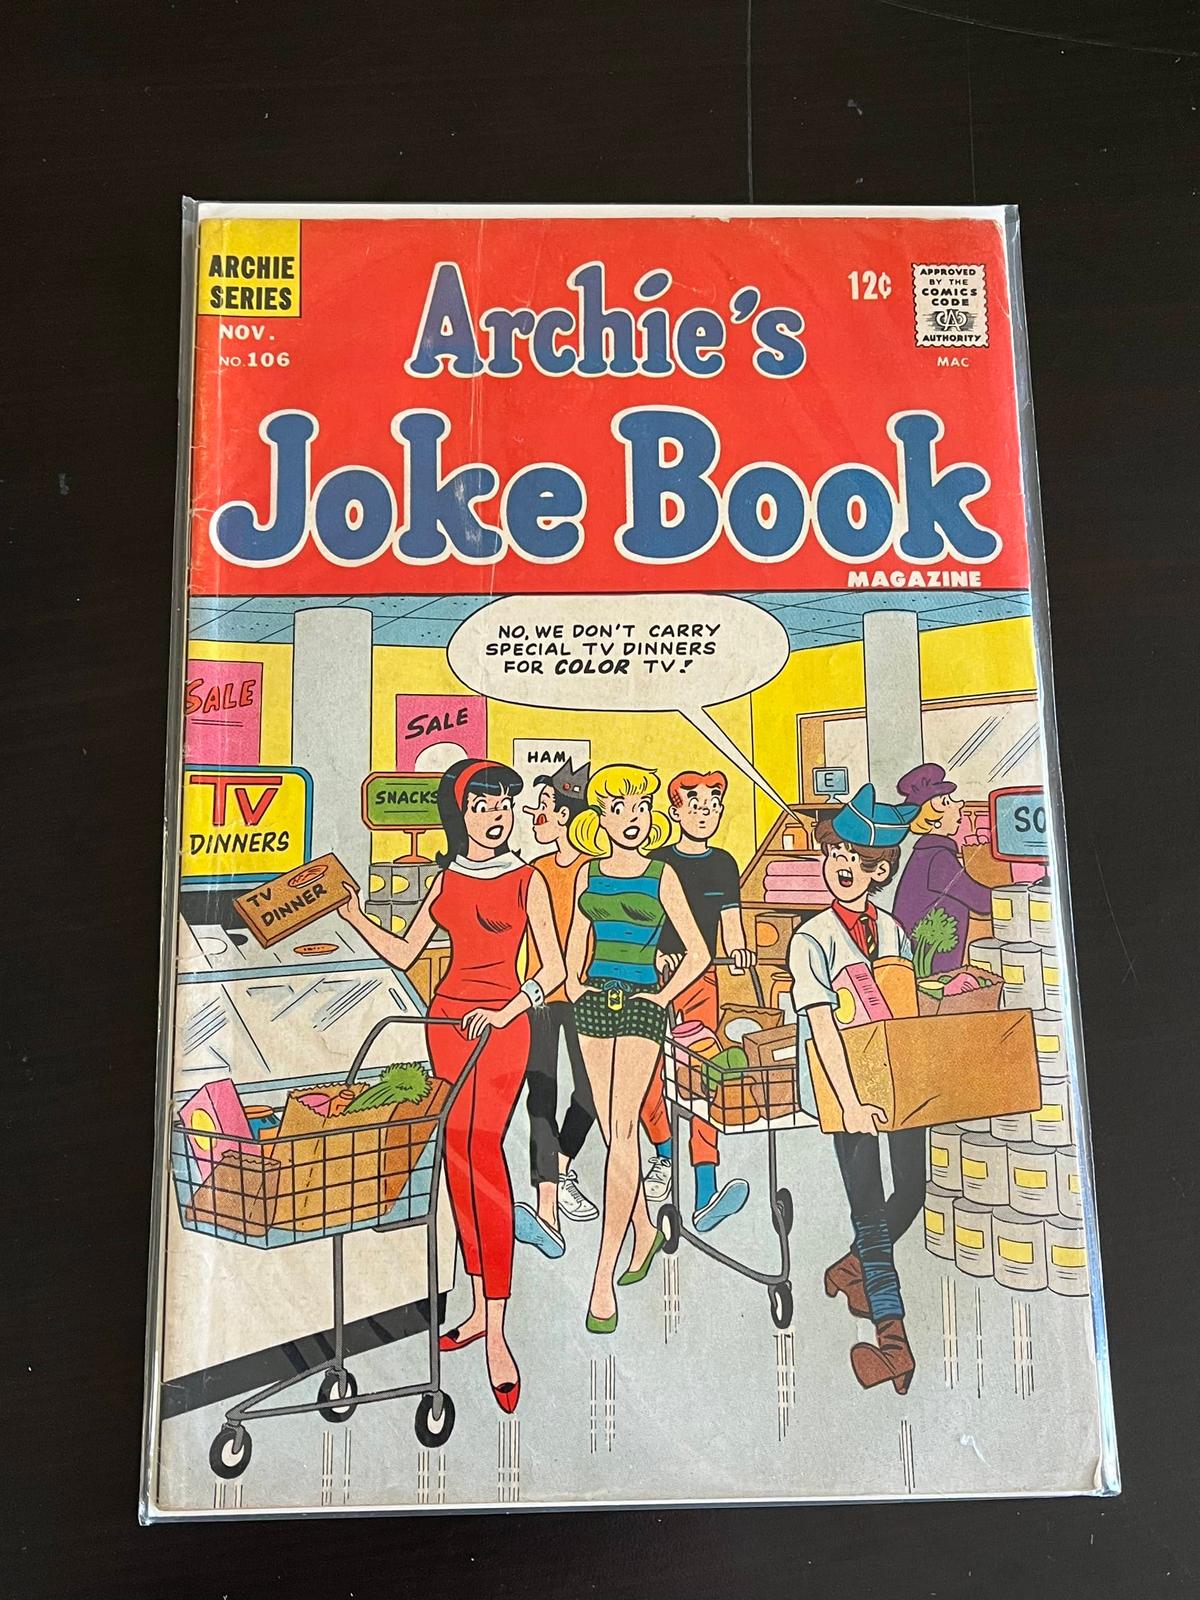 Archies Joke Book Comic #106 Archie Series 12 Cents Silver Age 1966